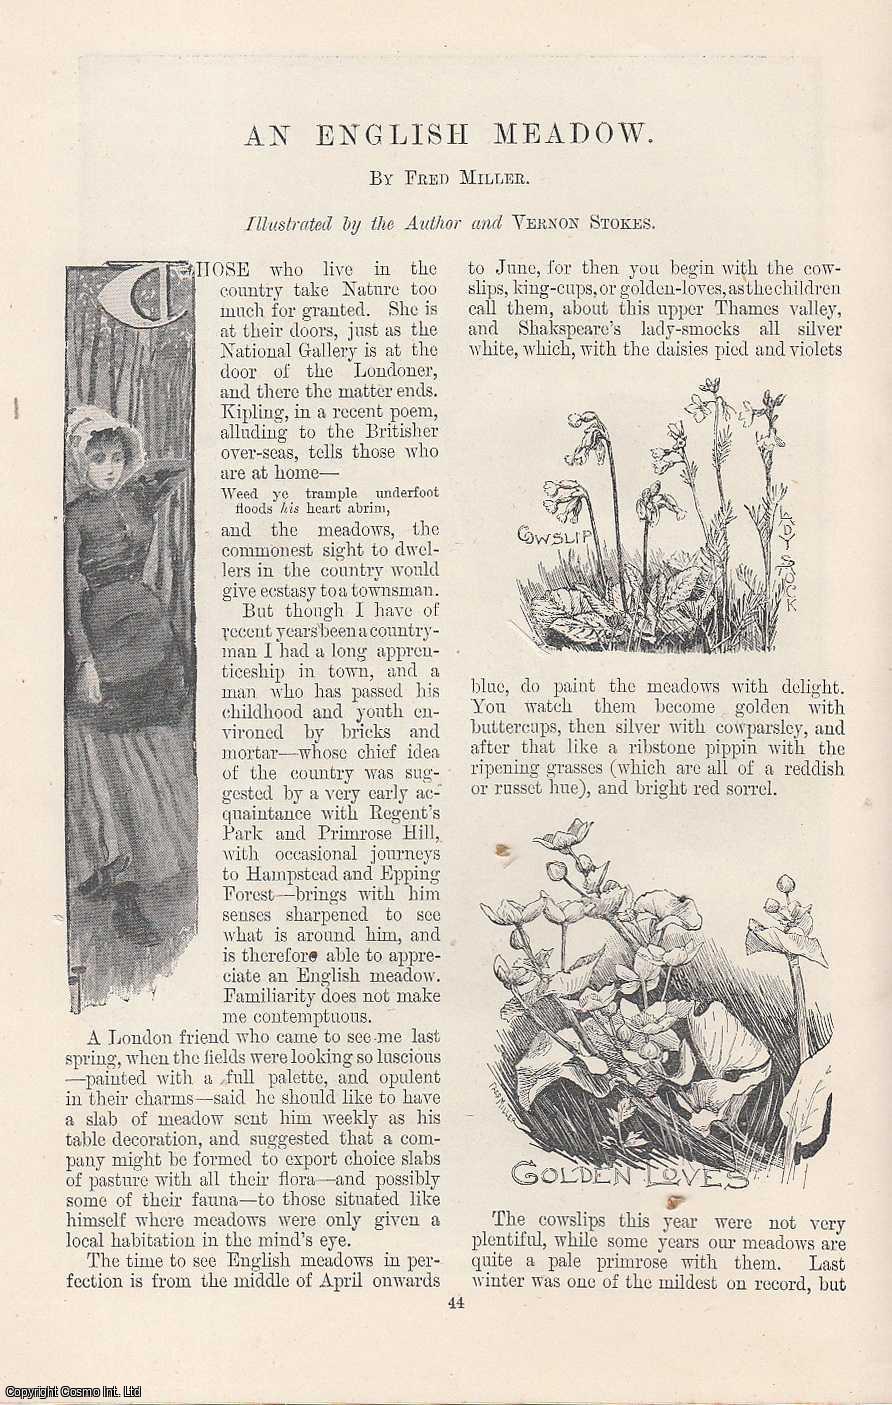 Fred Miller, illustrated by Vernon Stokes & The Author. - Epping Forest : An English Meadow. An original article from the Windsor Magazine, 1896.